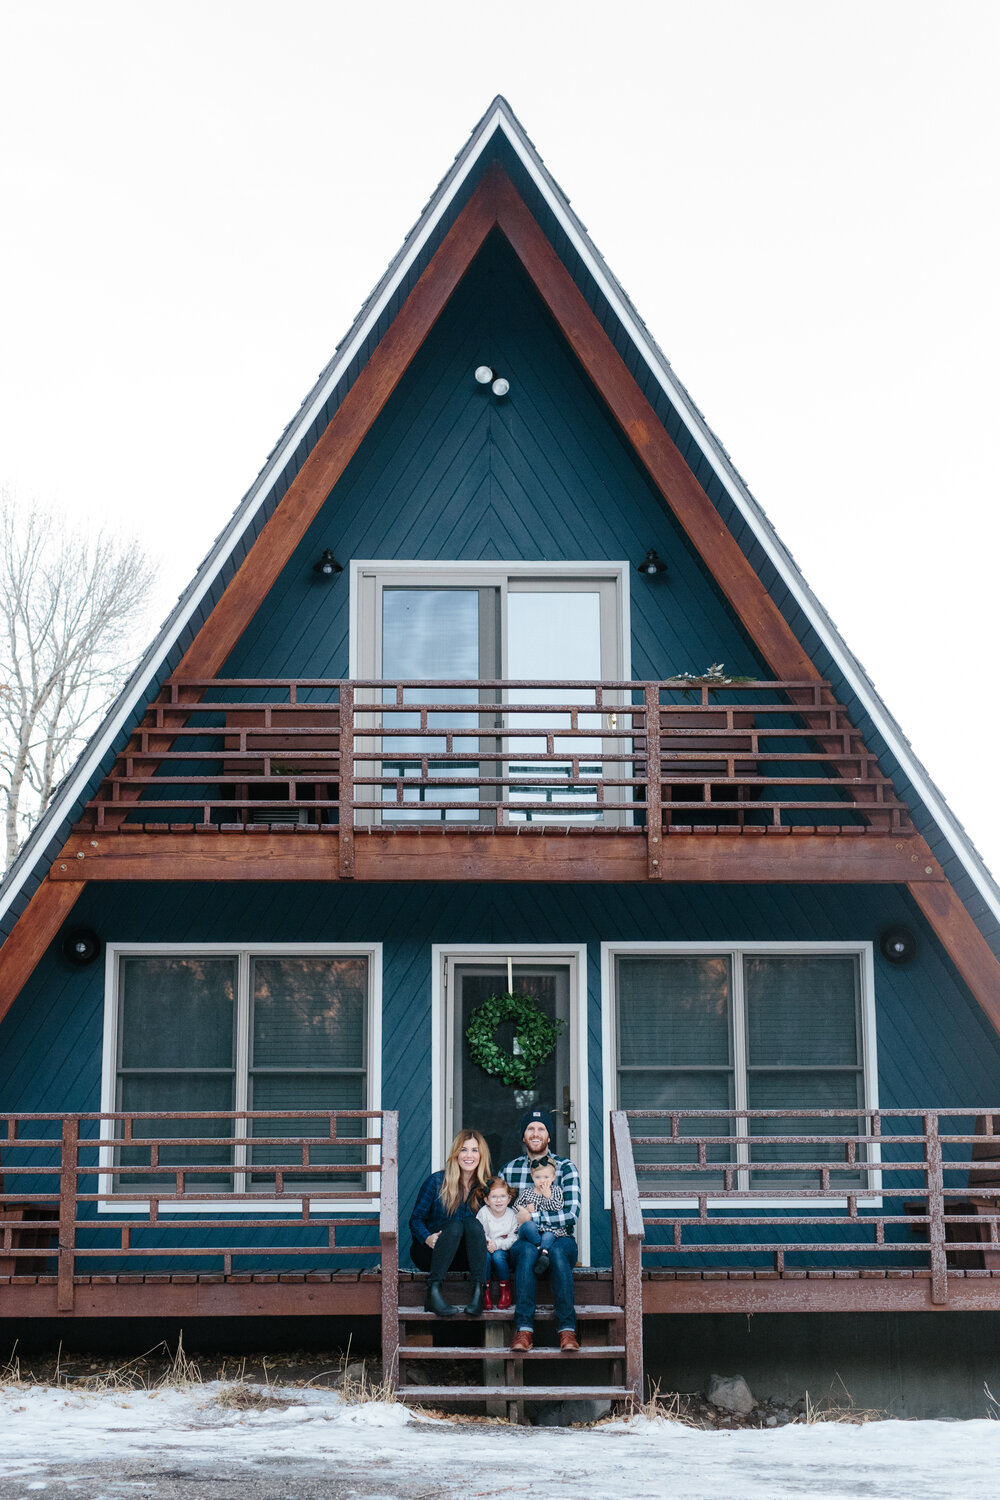 The McGee’s at A-Frame Haus.